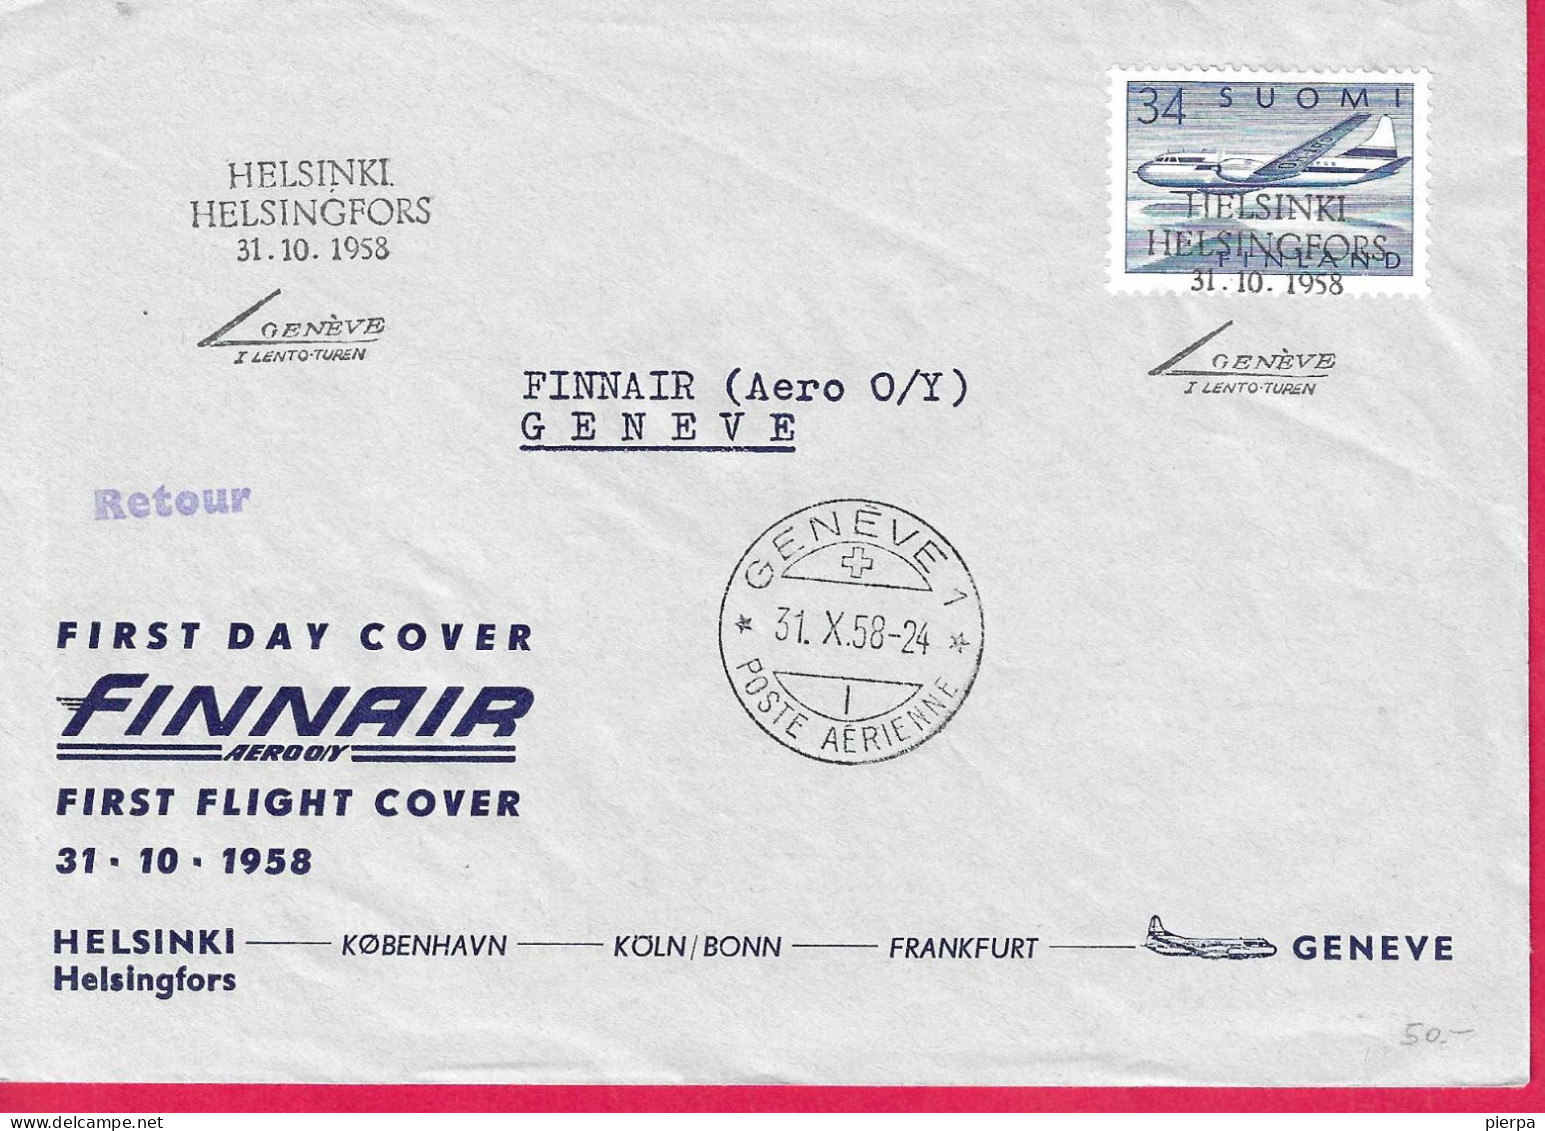 FINLAND- FIRST FLIGHT FINNAIR FROM HELSINKI TO GENEVE*31.10.58* ON OFFICIALE COVER - Briefe U. Dokumente